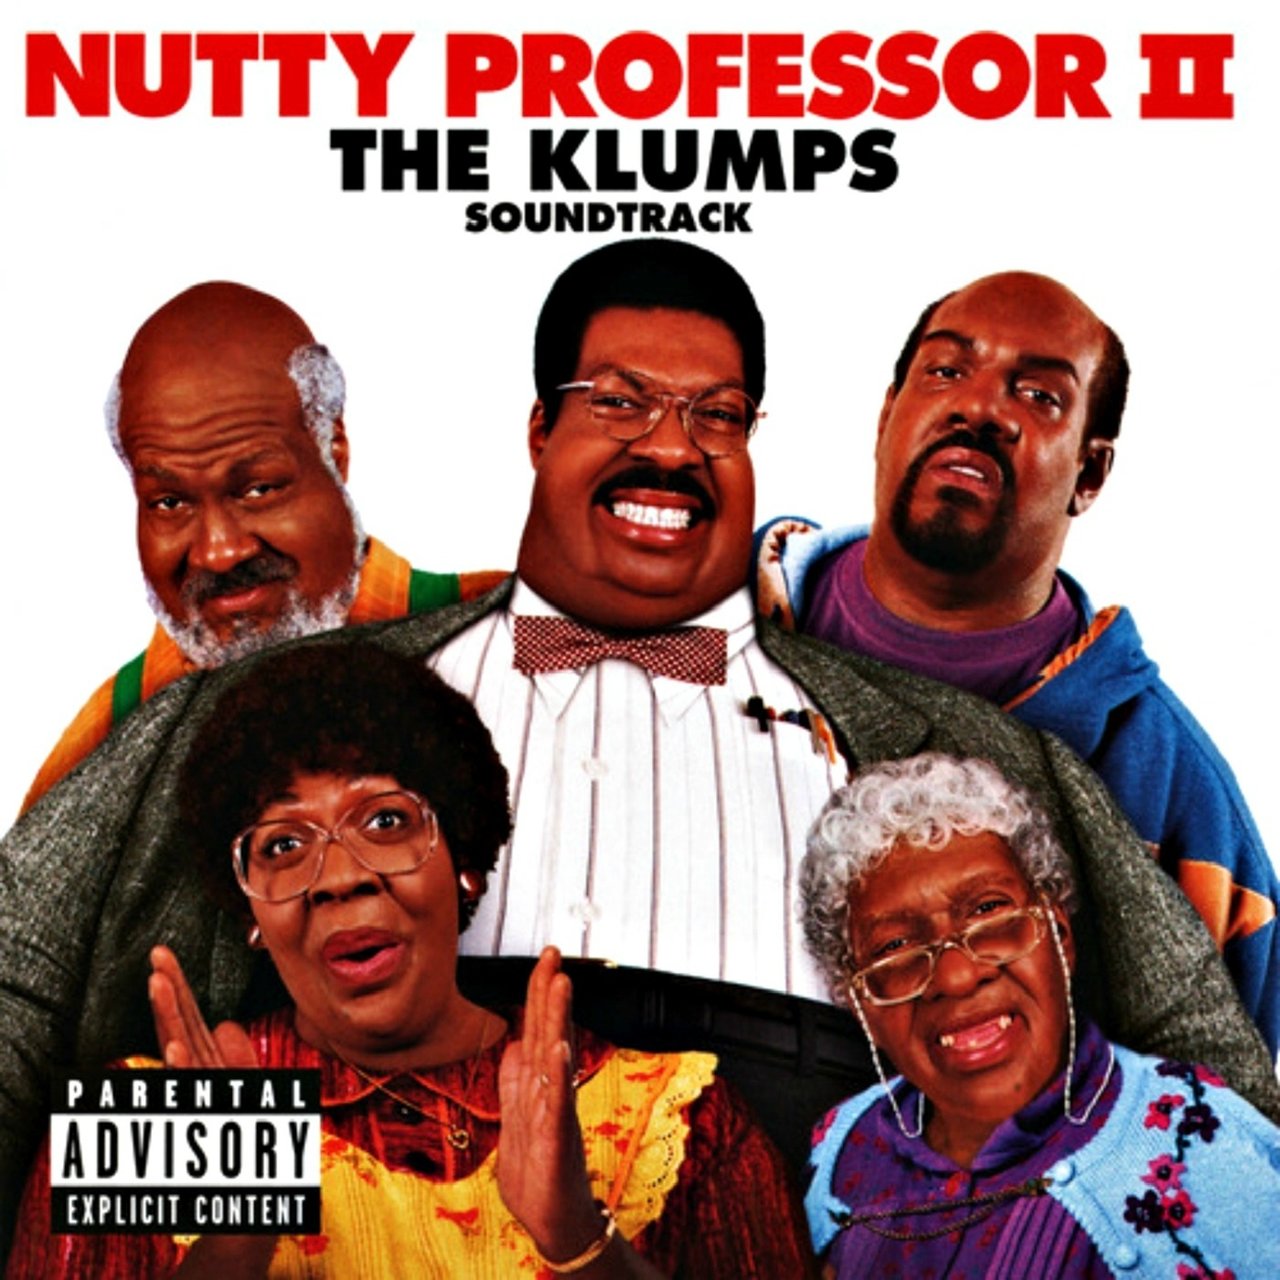 Nutty Professor II: The Klumps (Soundtrack) (Cover)